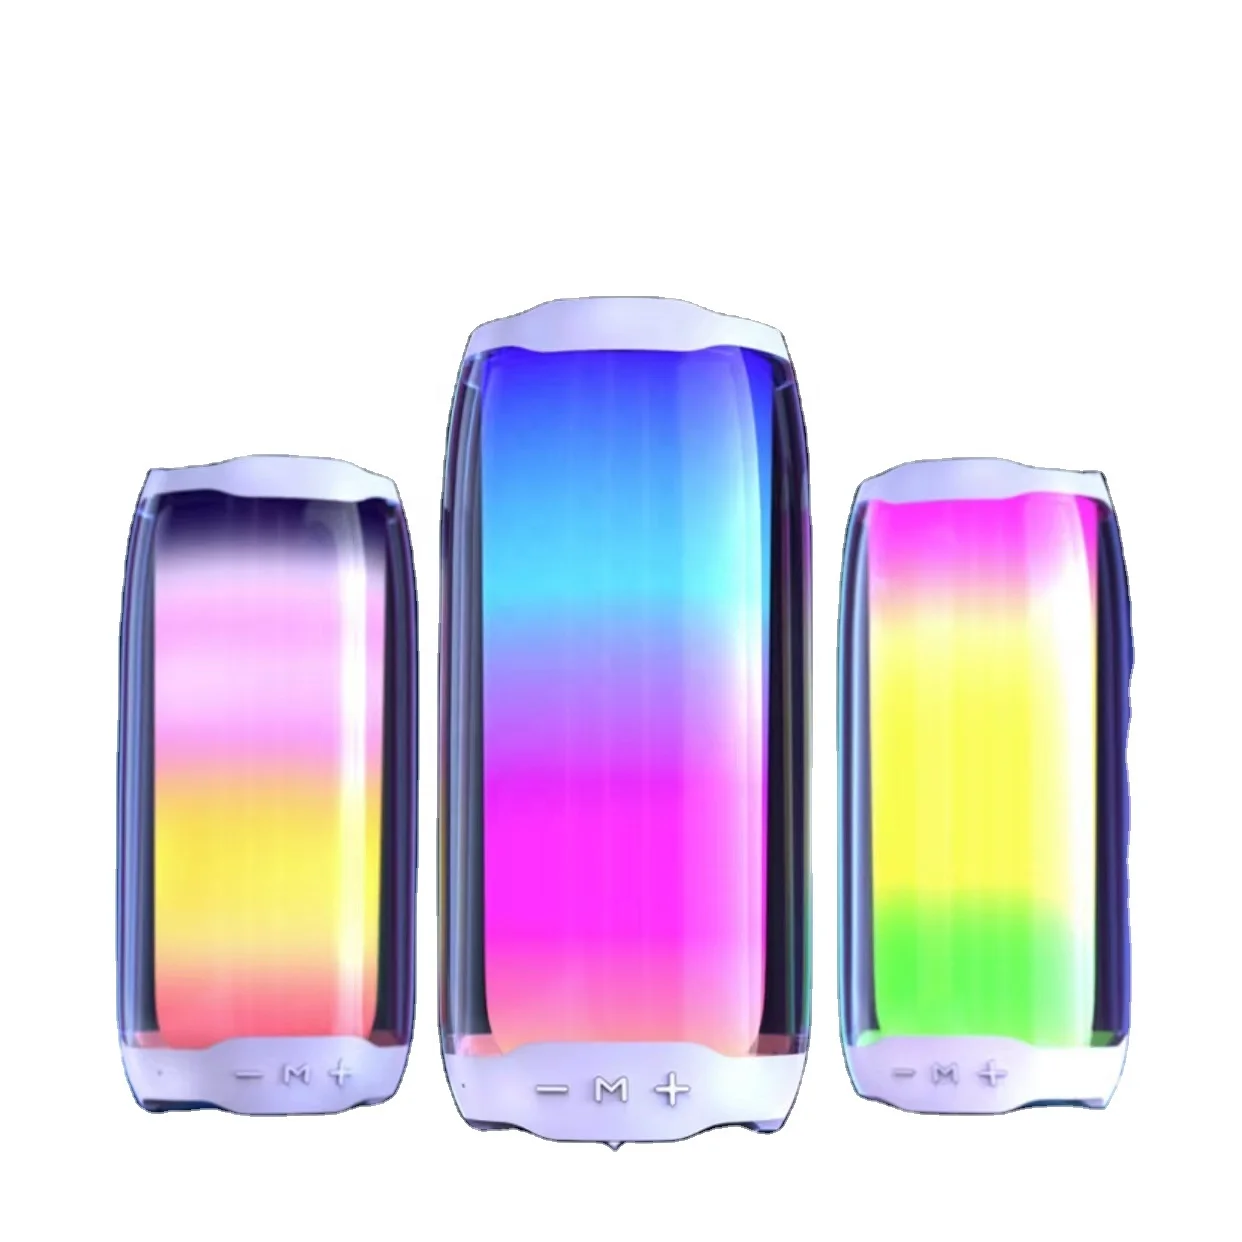 

Outdoor subwoofer Pluse4 Colorful Portable Active super Bass sound Speakers Column Wireless BT Speaker with color LED RGB light